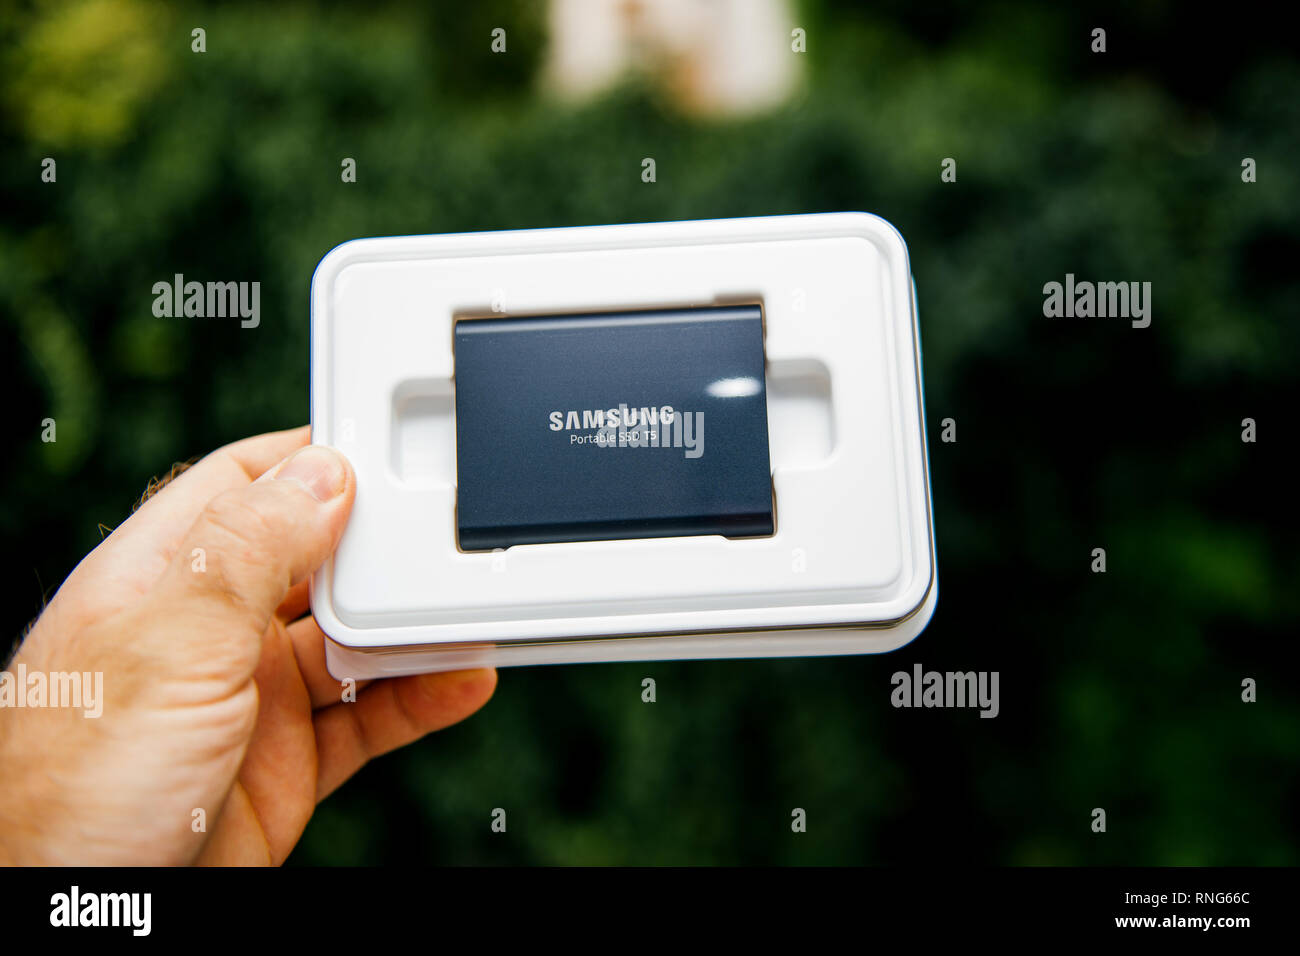 PARIS, FRANCE - AUG 14, 2018: Man hand holding plastic box of Samsung T5 Portable SSD 2 tb external hard drive disk with high read and write speed against green background unboxing testing  Stock Photo